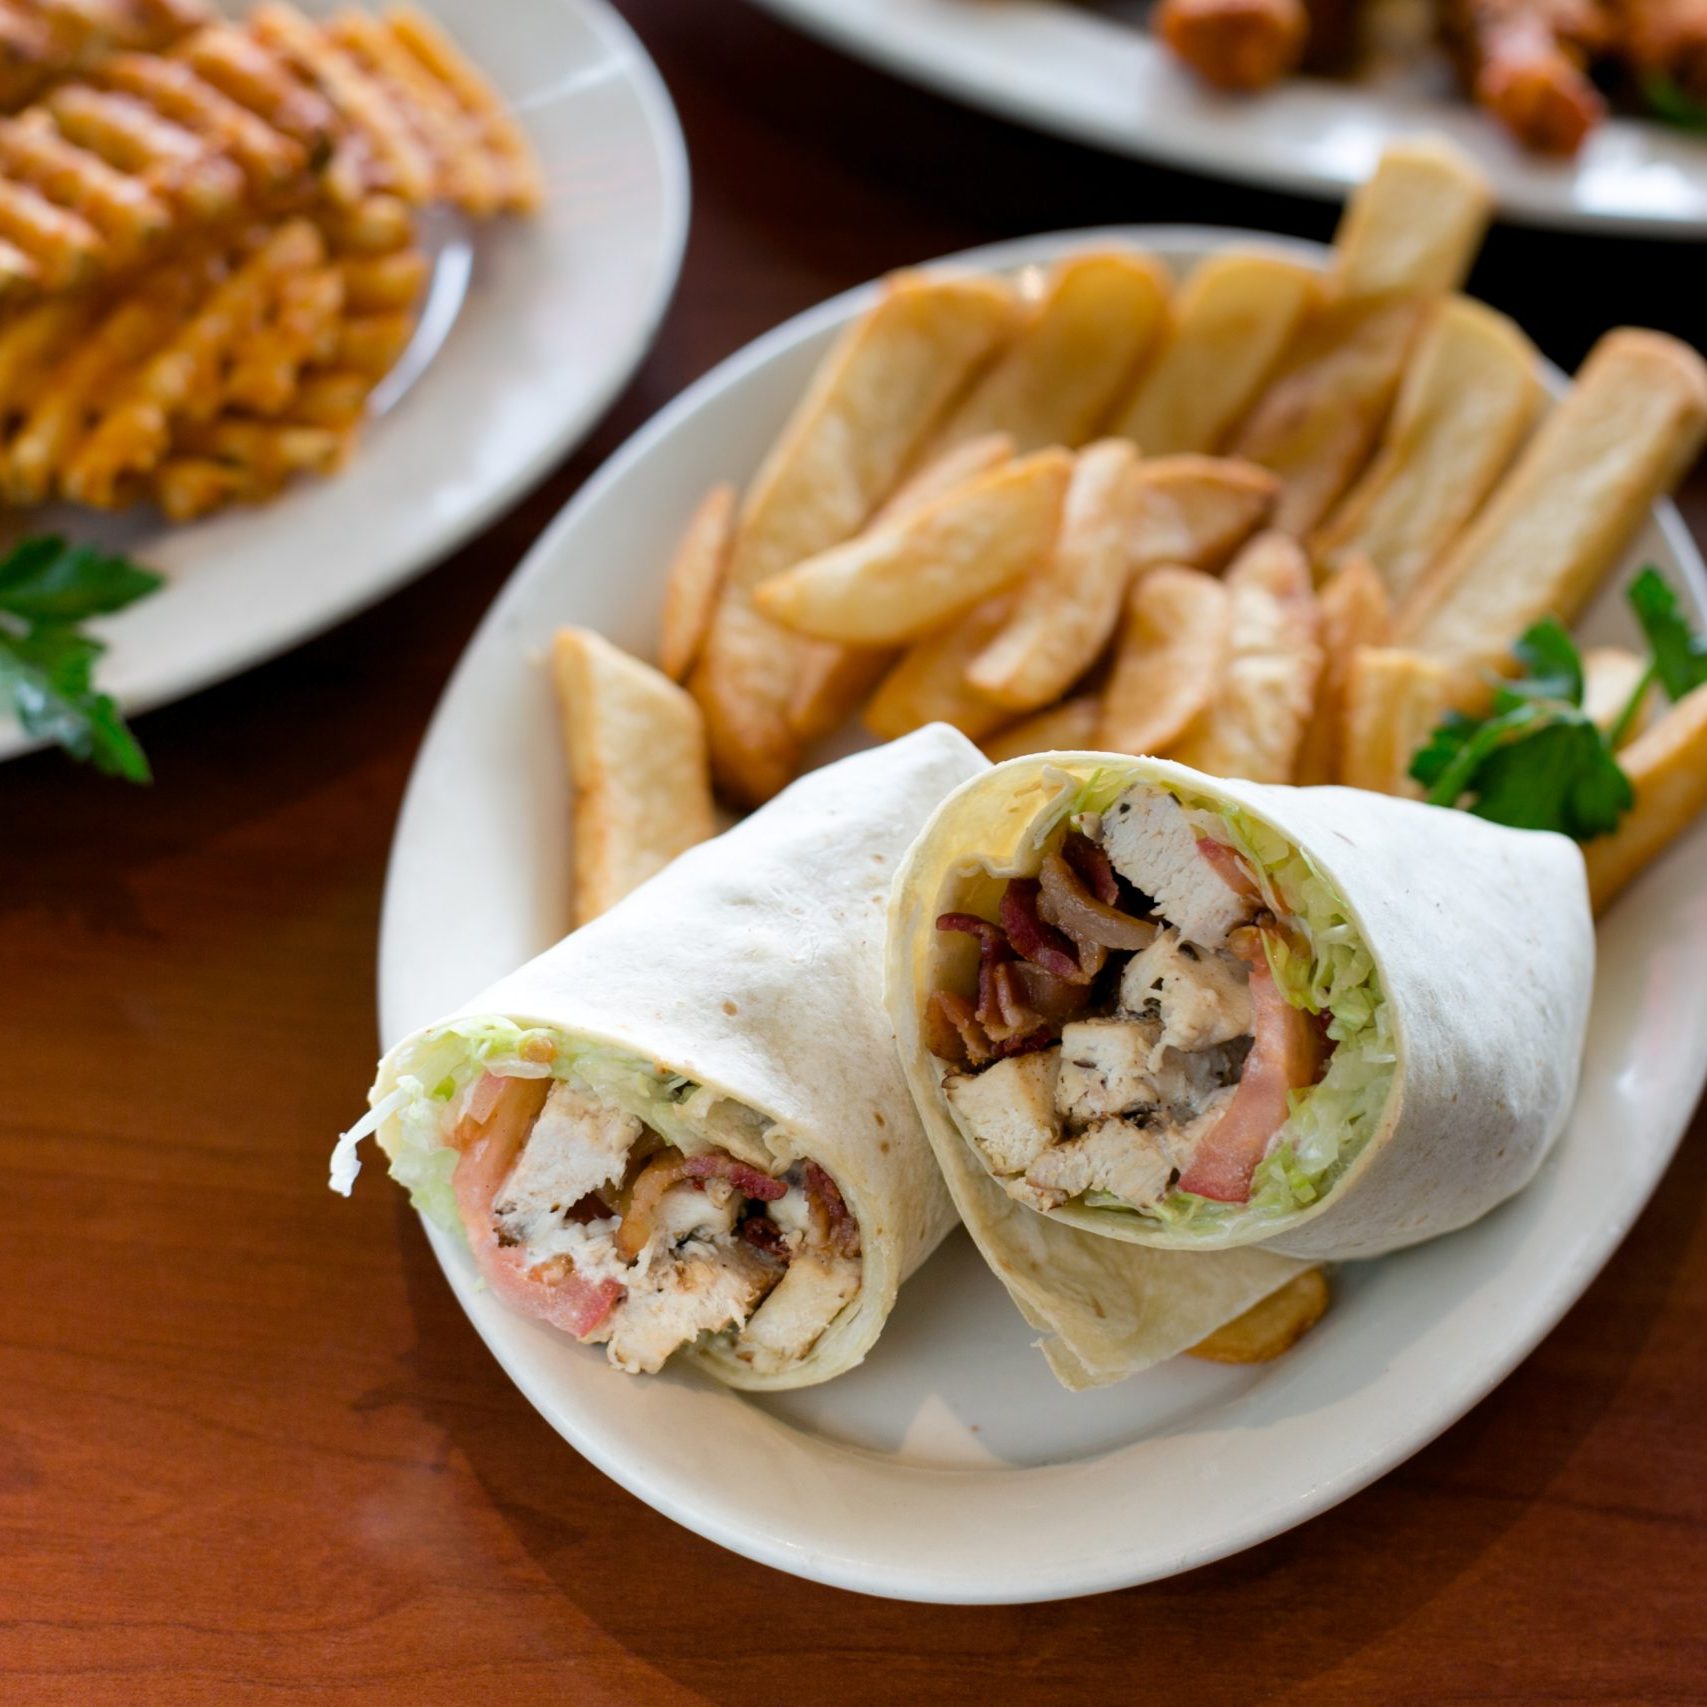 A plate of french fries and a chicken wrap on a table.